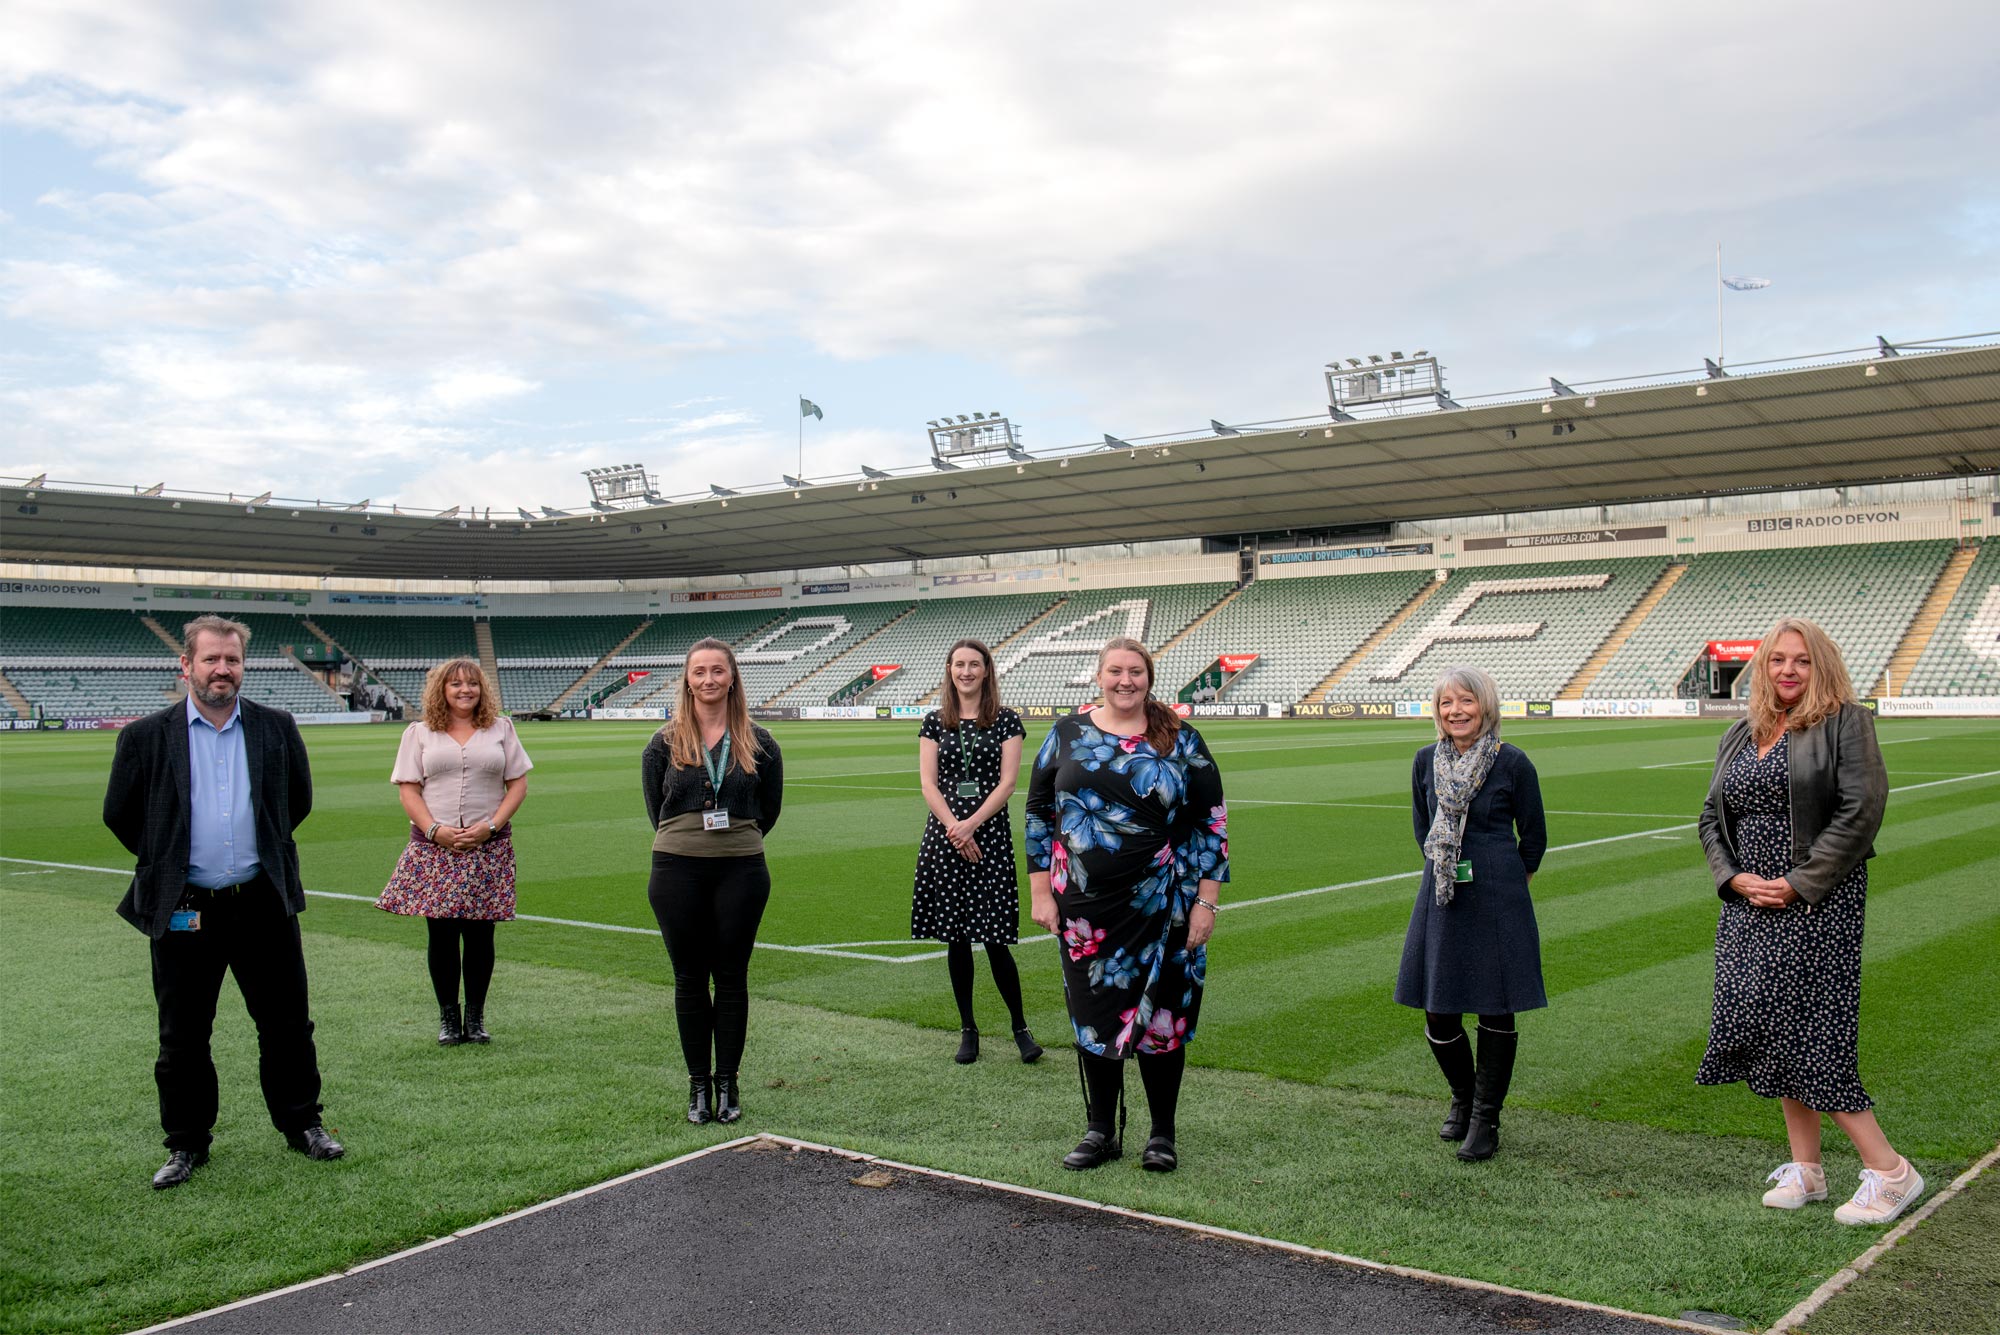 Foster for Plymouth photoshoot of the team at Plymouth Argyle Football Club